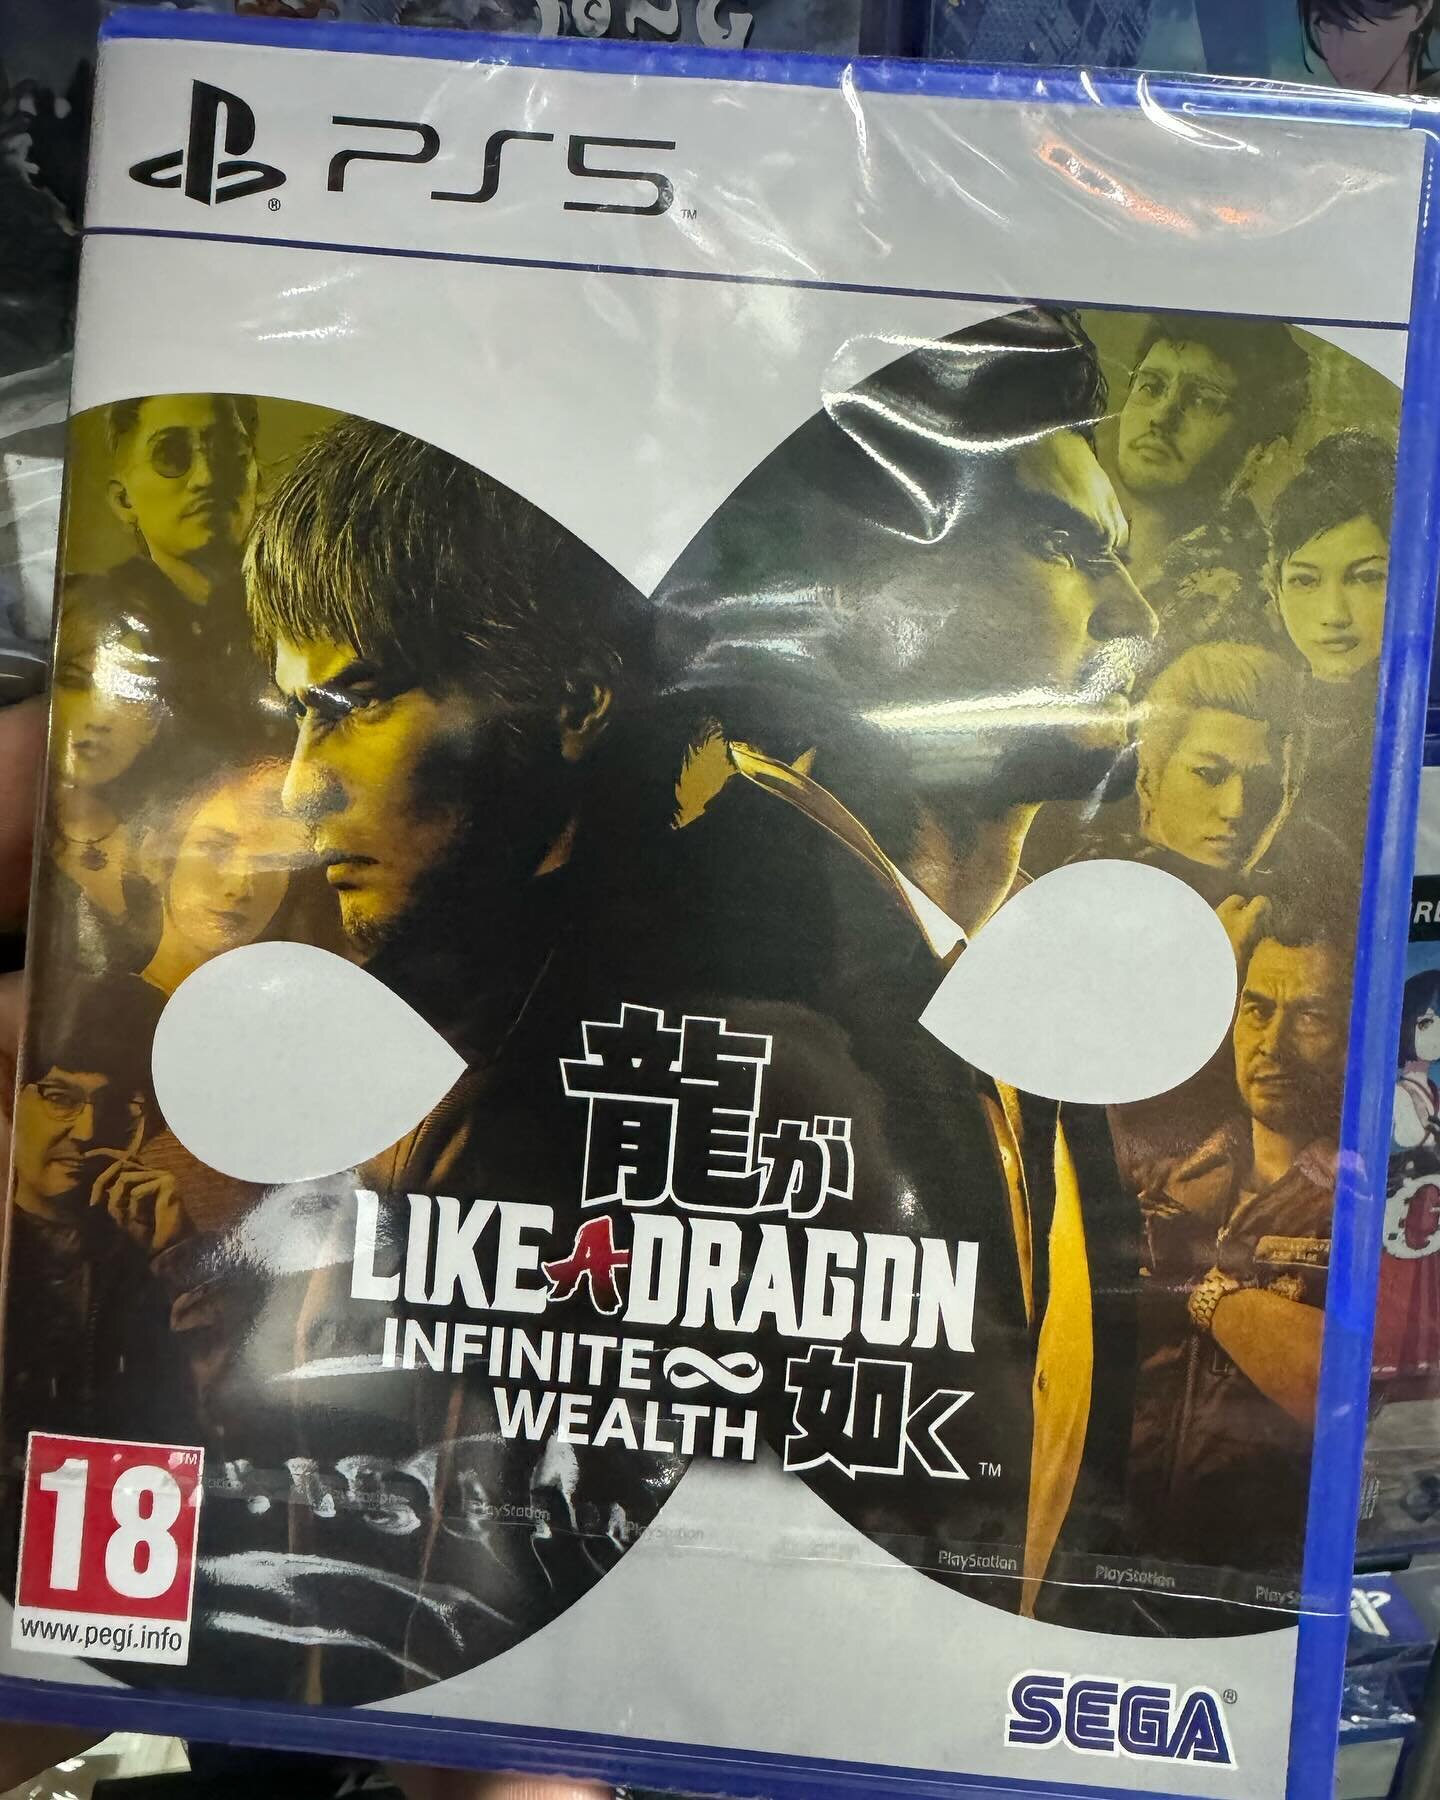 Like A Dragon Infinite Wealth for PS5 in store now